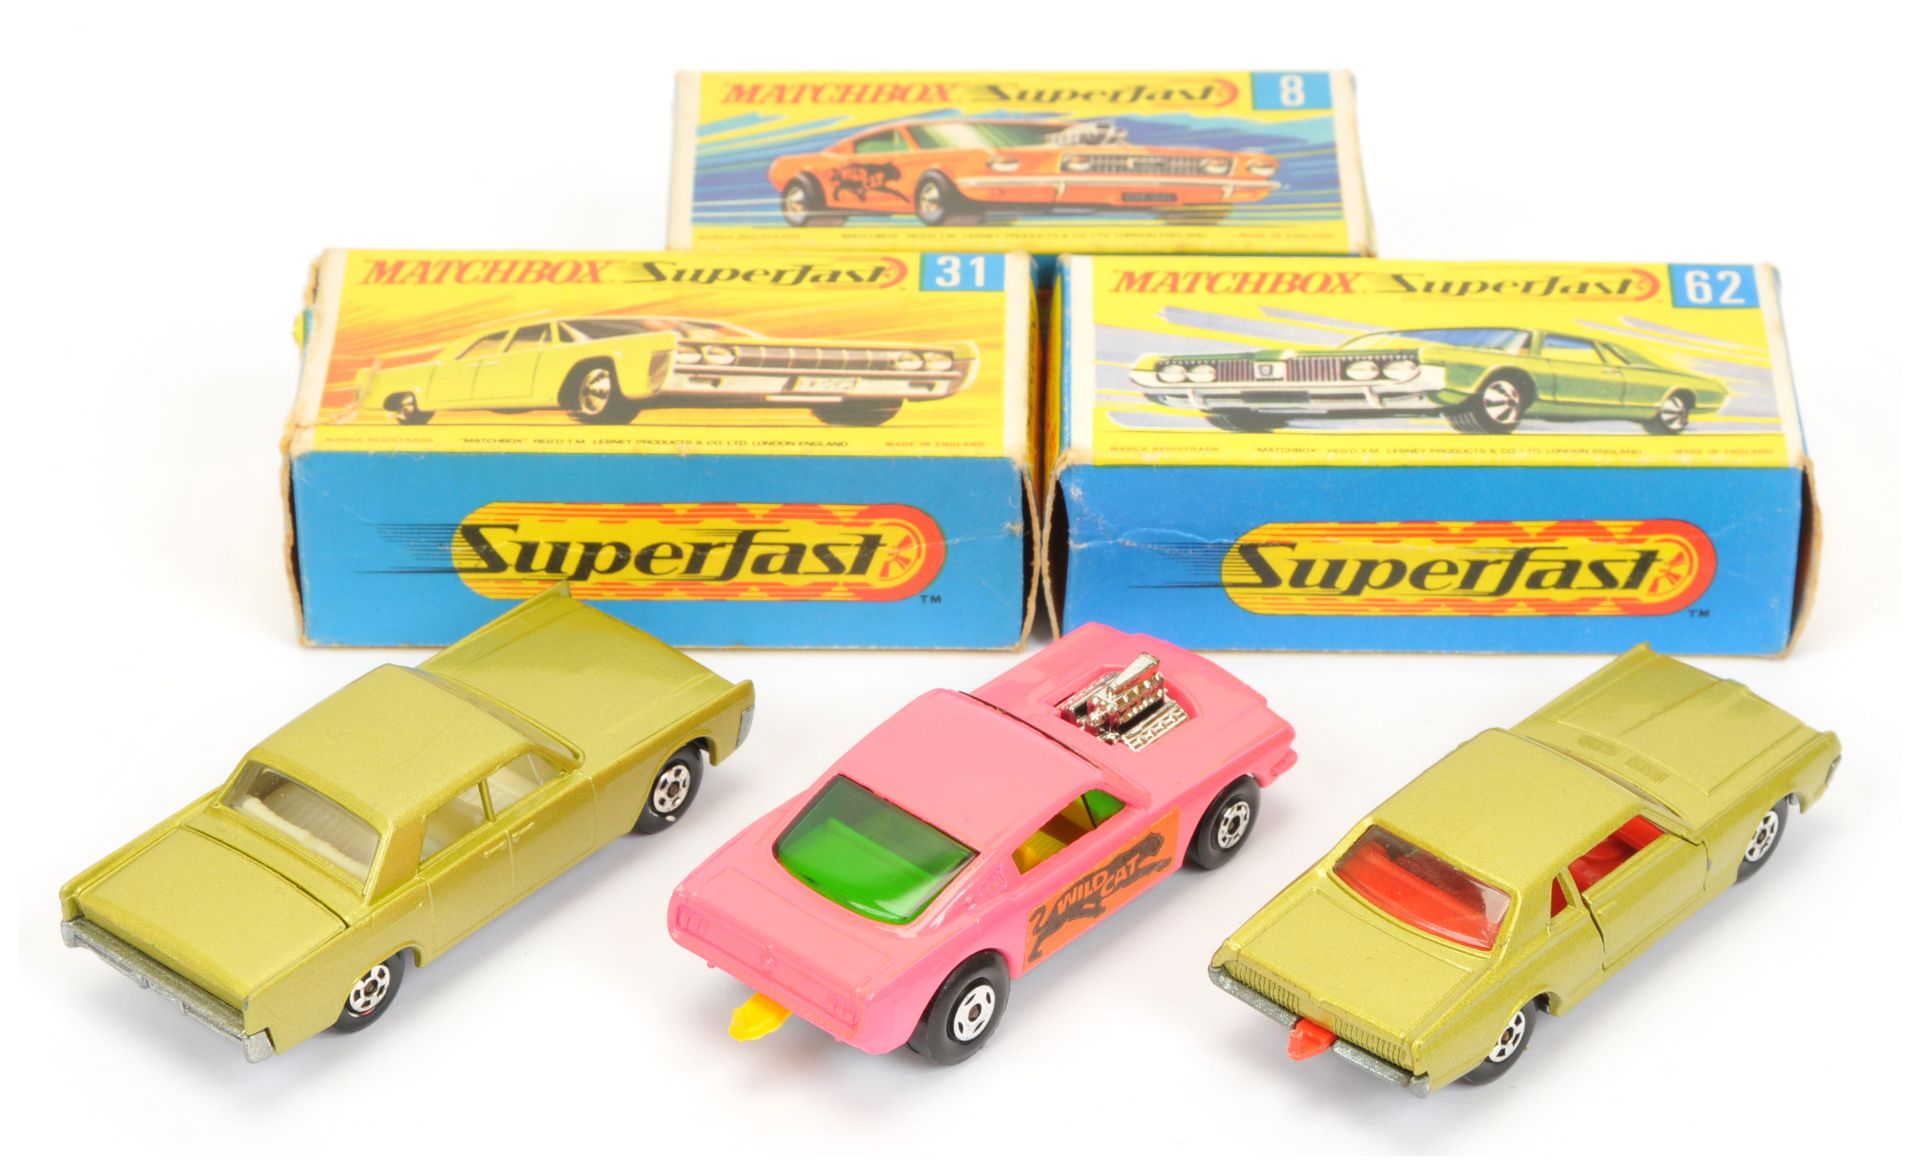 Matchbox Superfast  Group Of 3 - (1) 8b Ford Mustang Wildcat dragster - Pink body, black base, (2... - Bild 2 aus 2